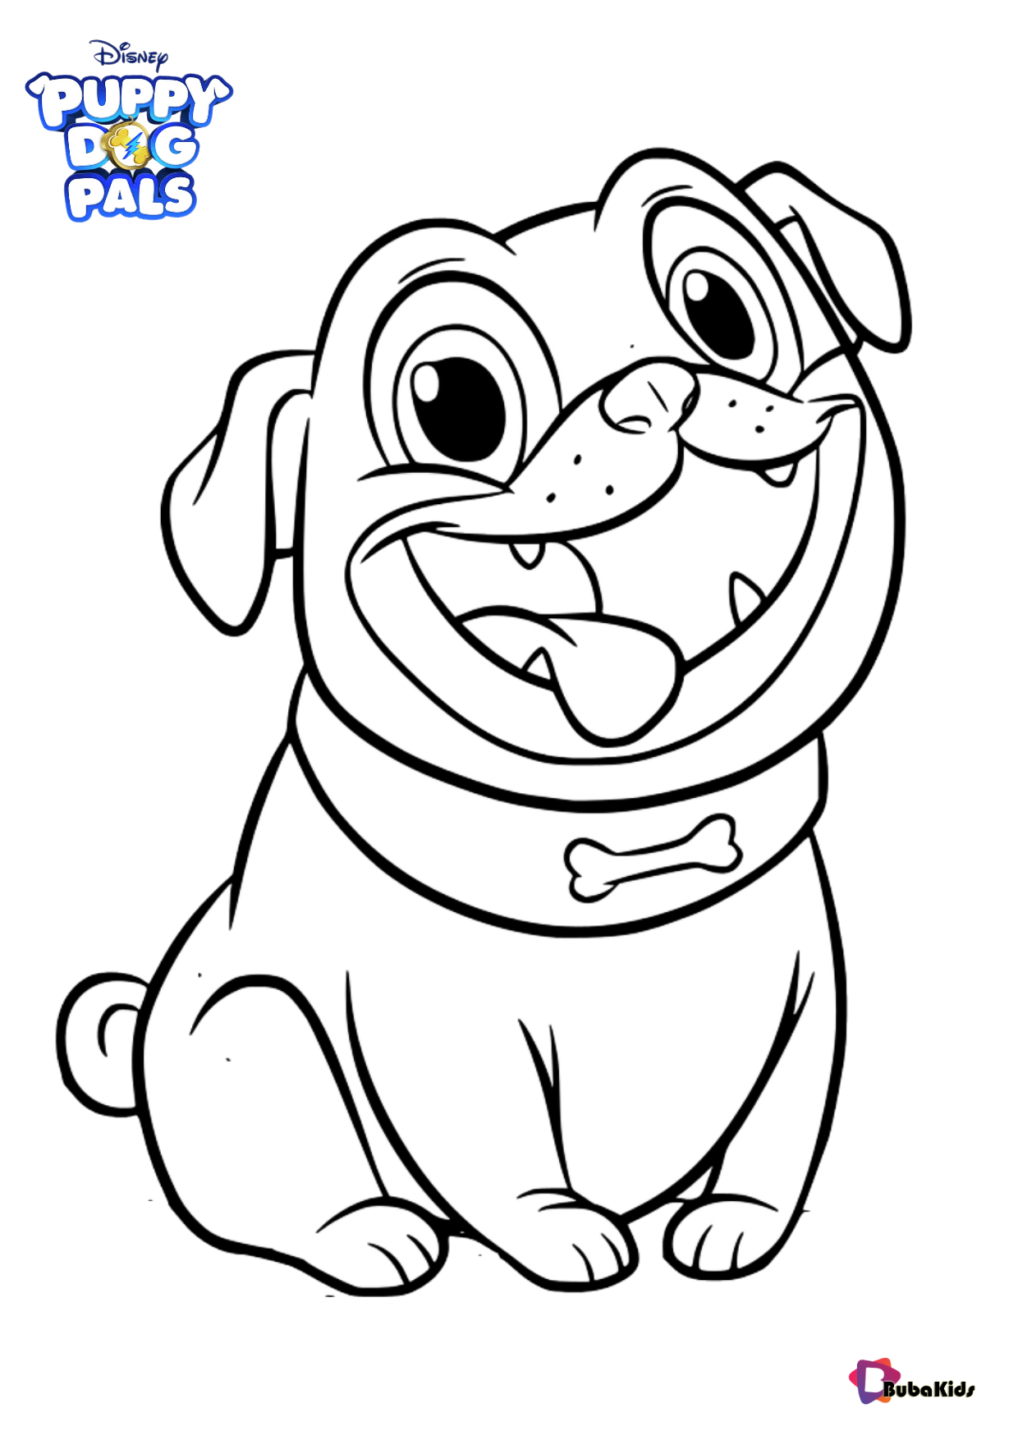 Rolly Puppy Dog Pals children television series coloring page